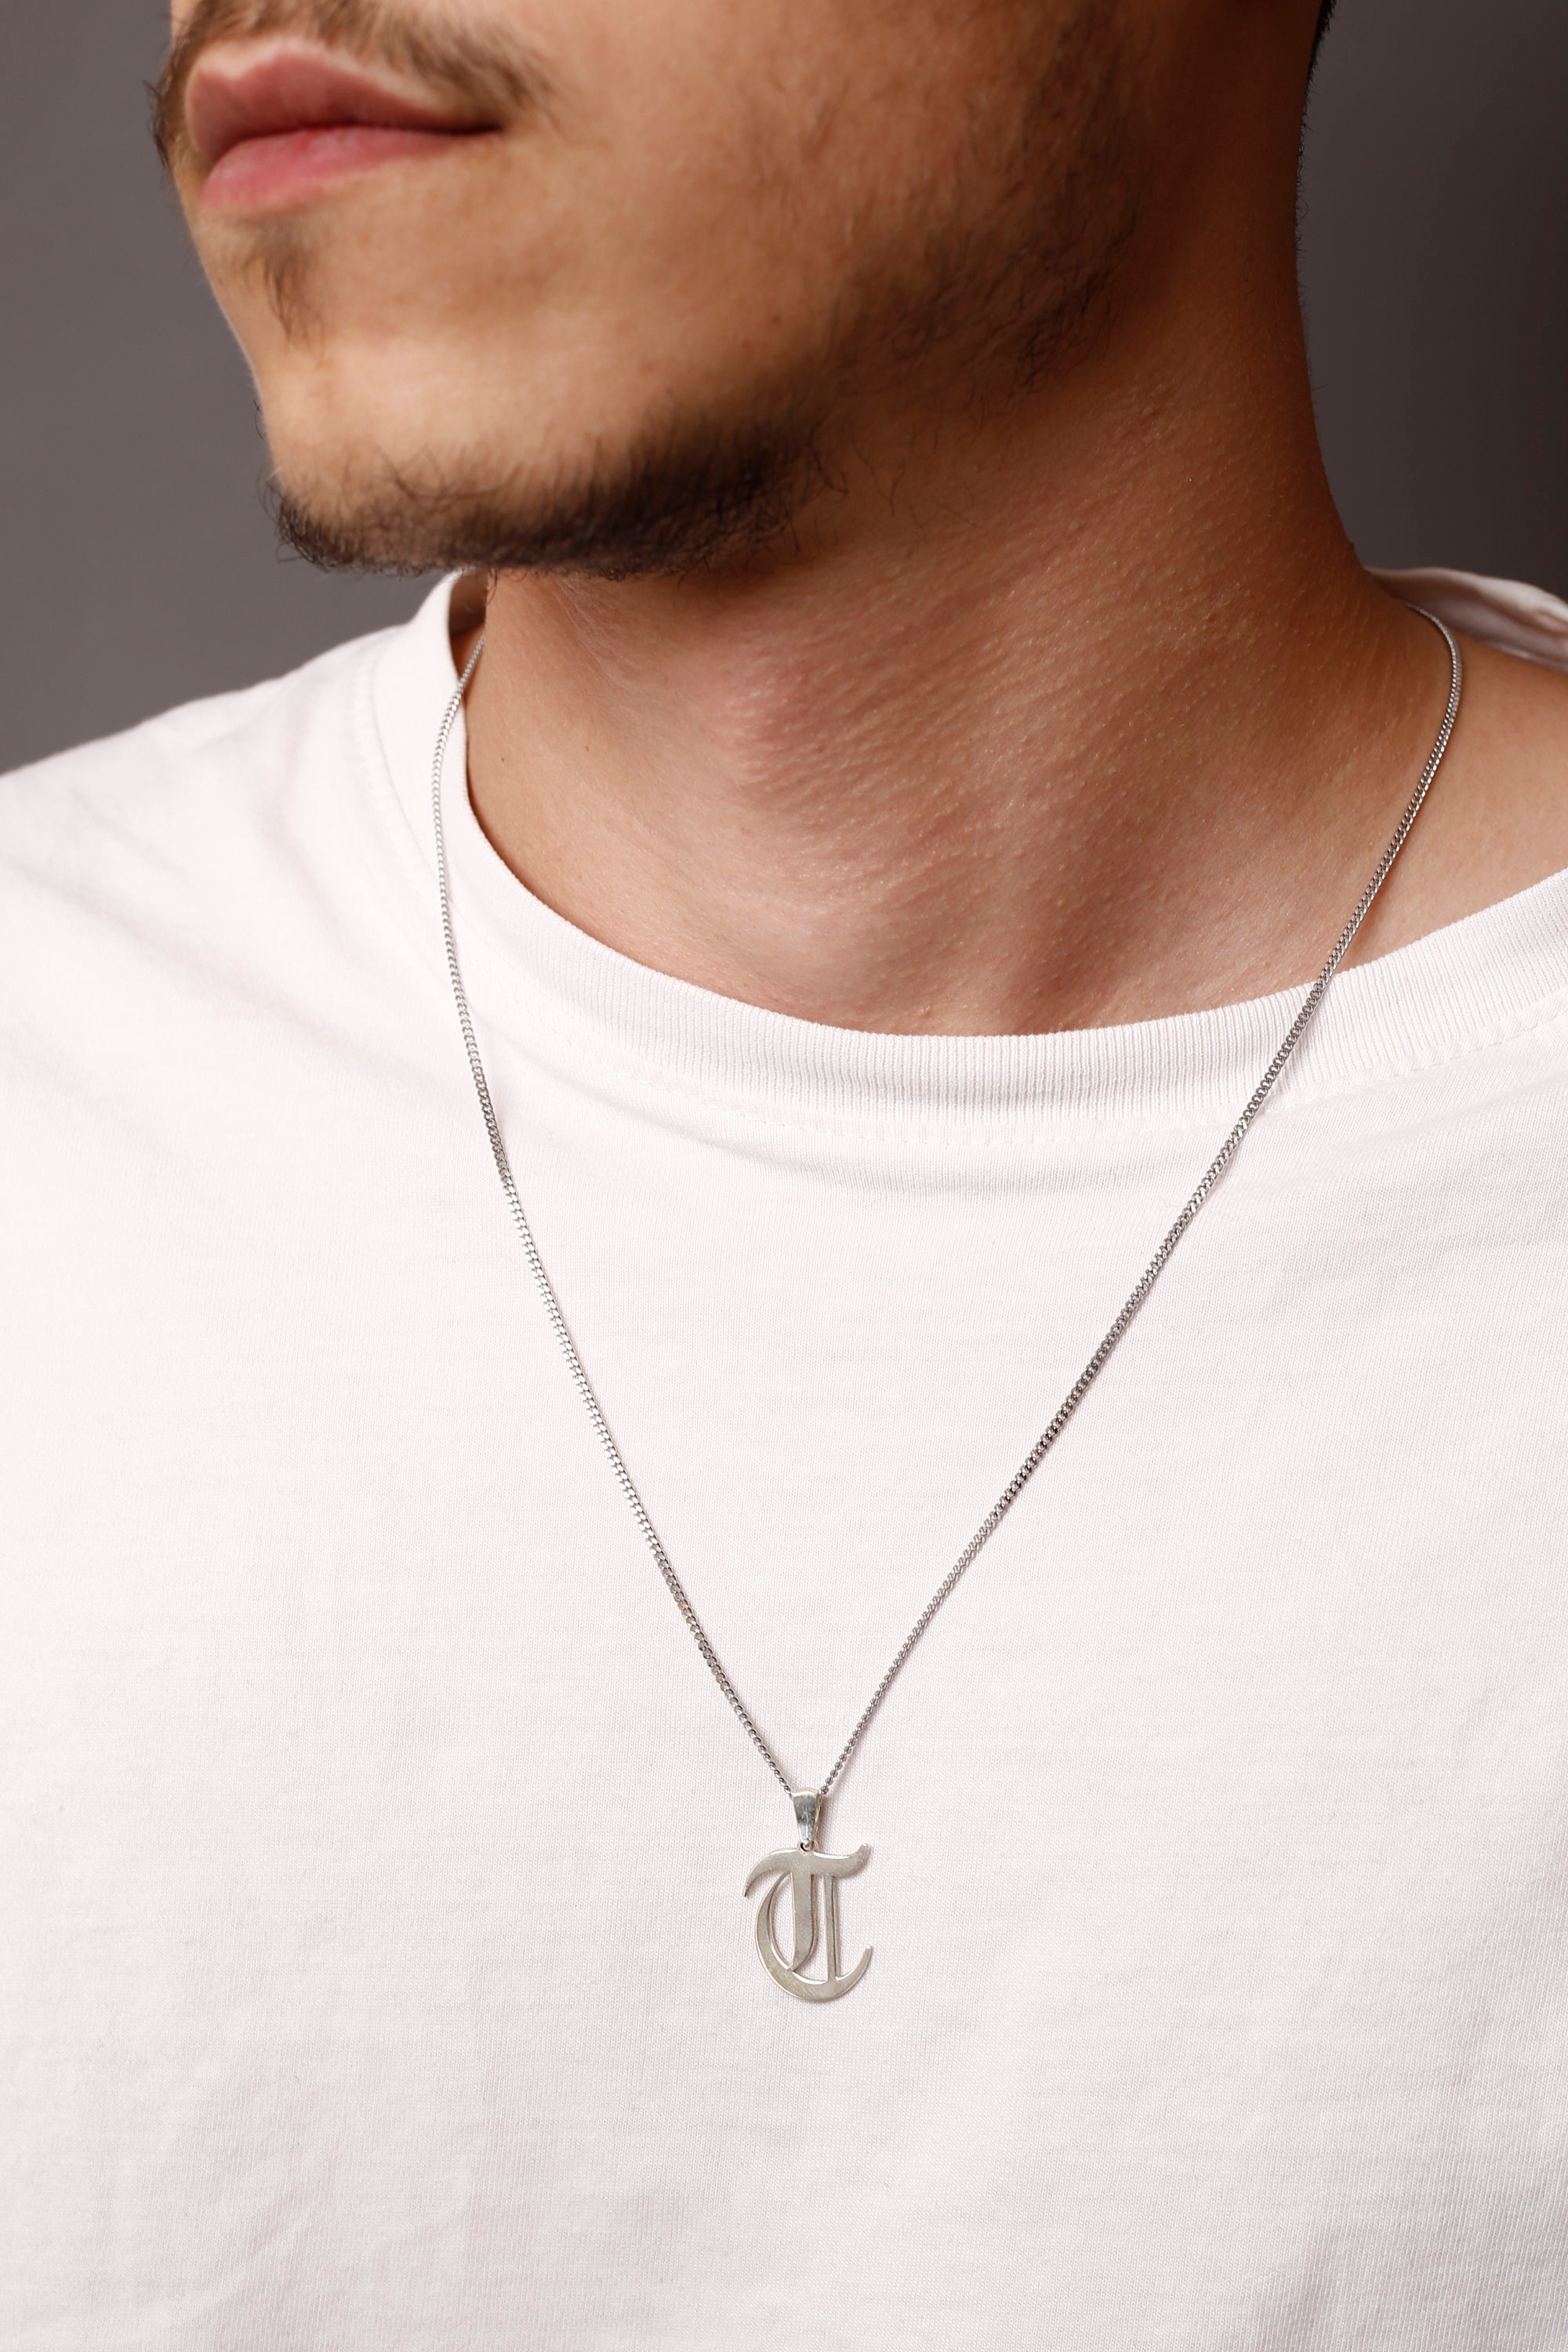 Buy Mens Initial Necklace for Men / Women Personalised Silver